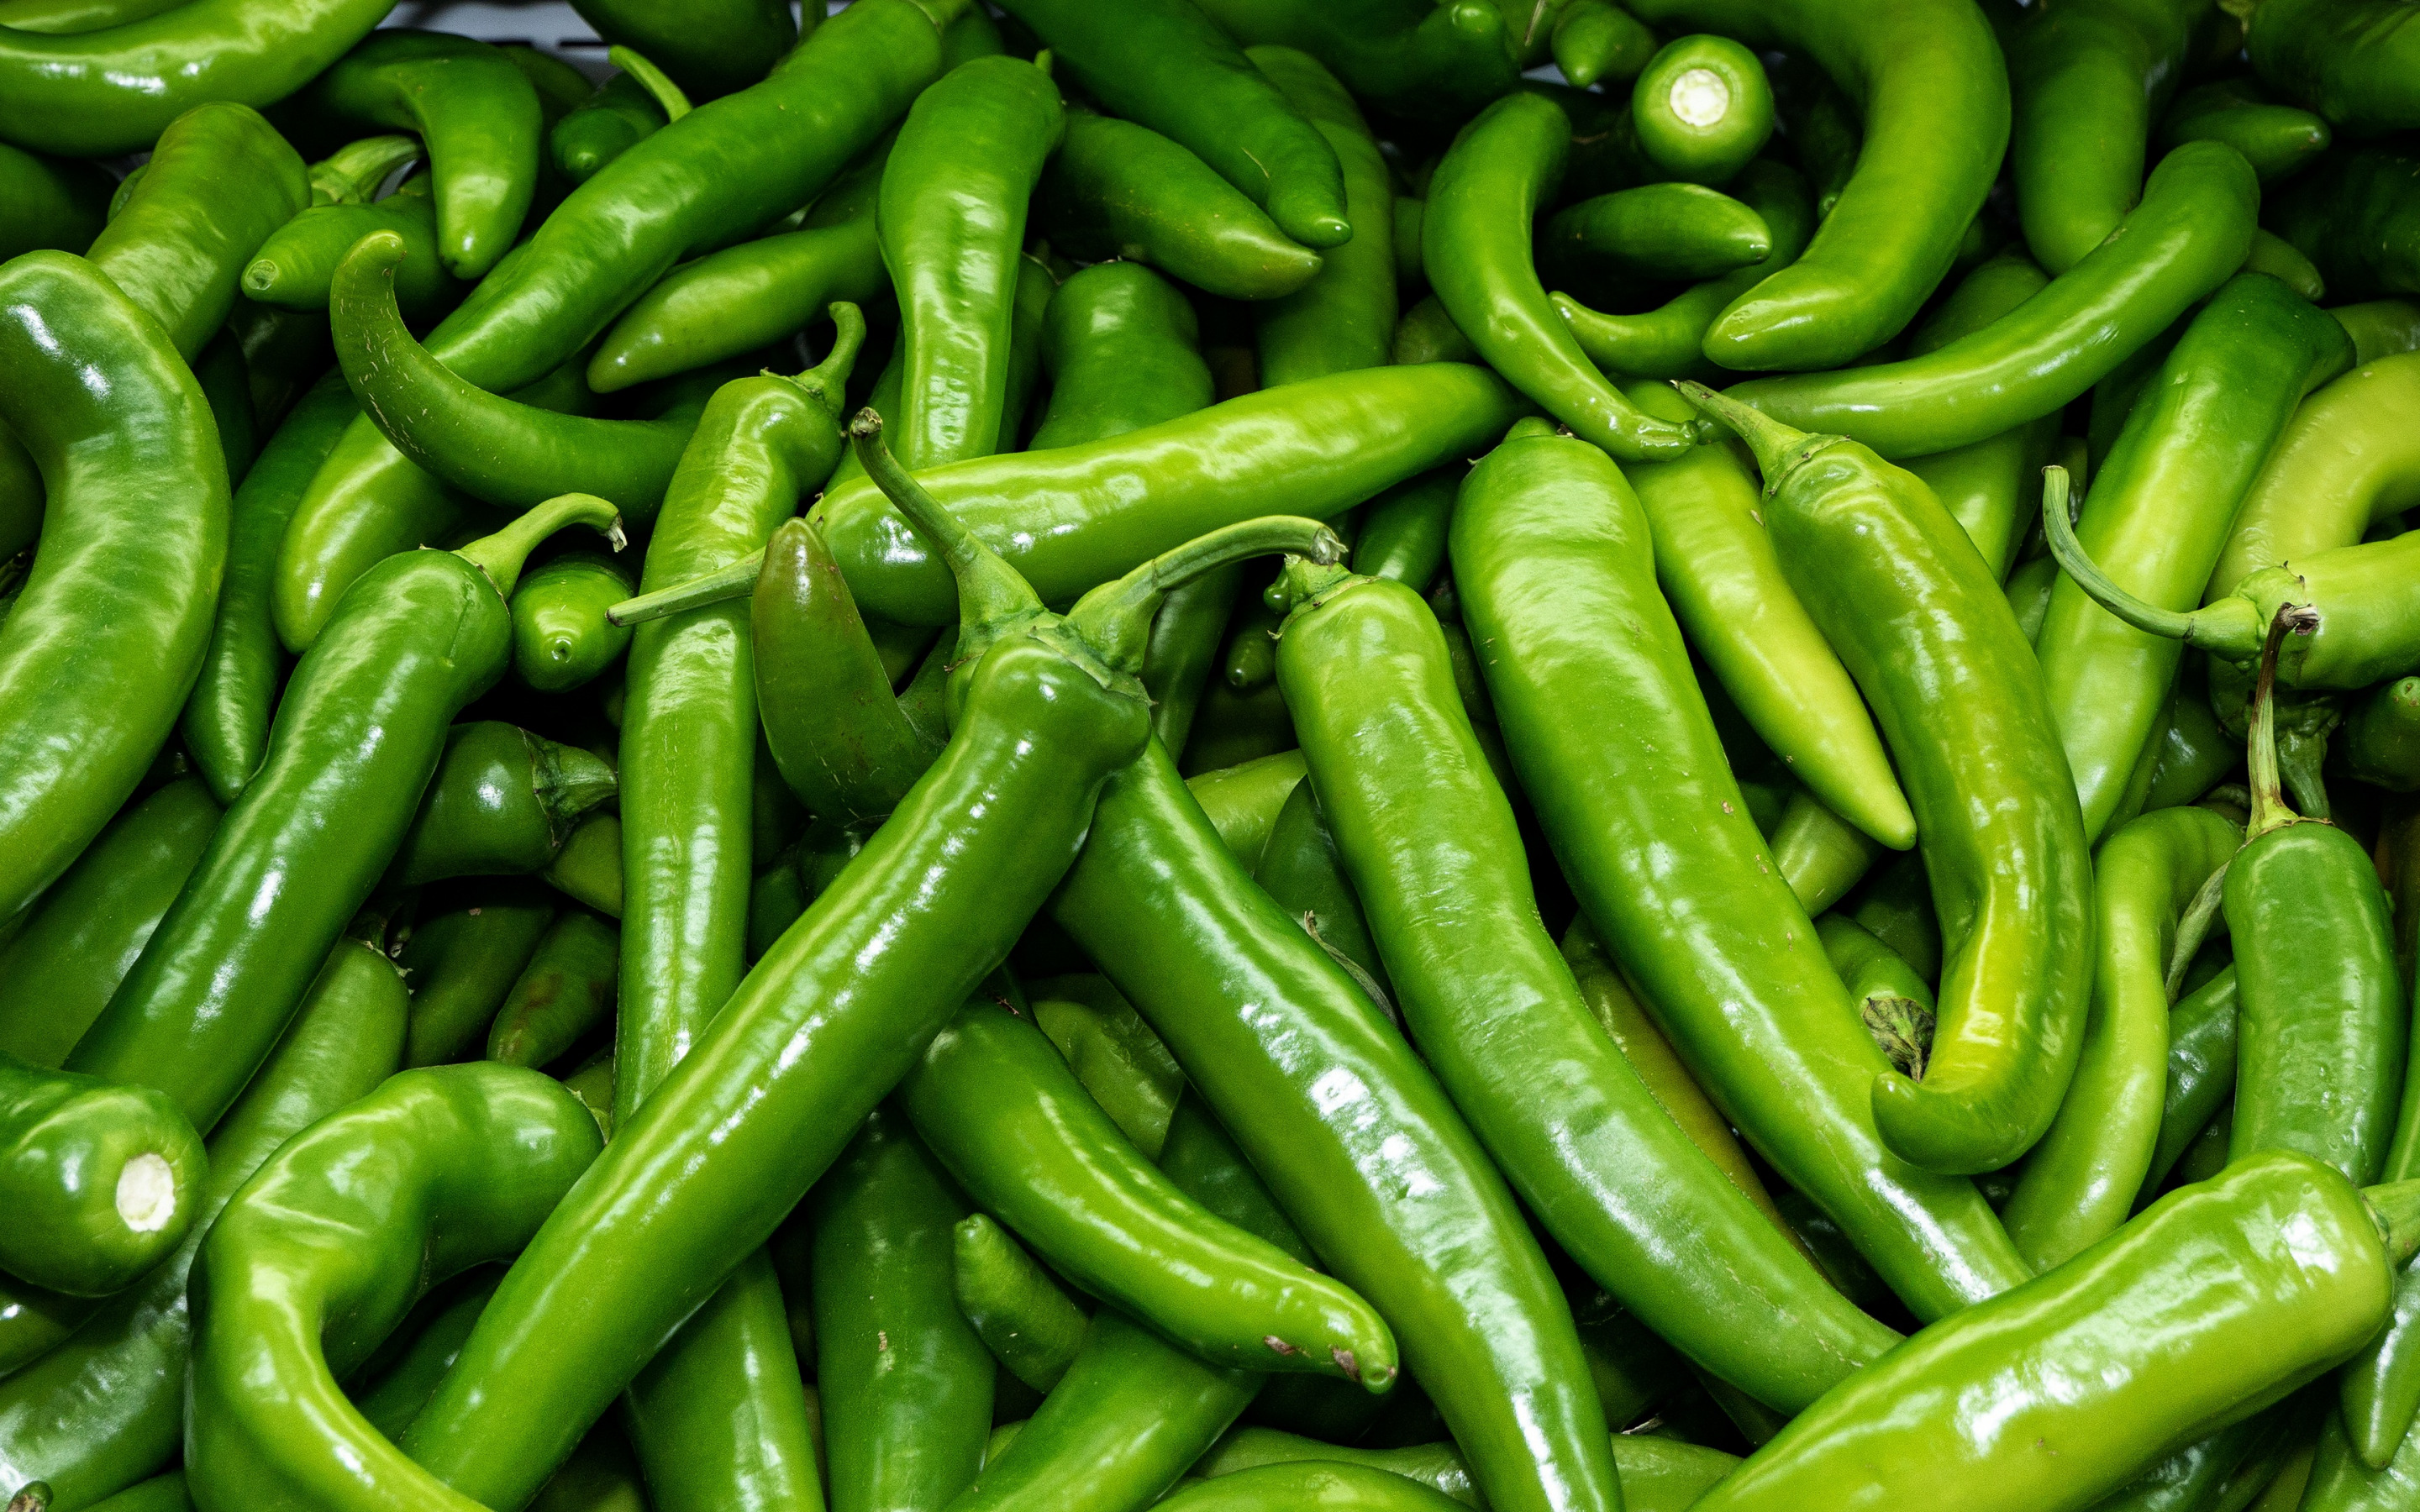 Download wallpapers green pepper, hot pepper, texture with pepper ...